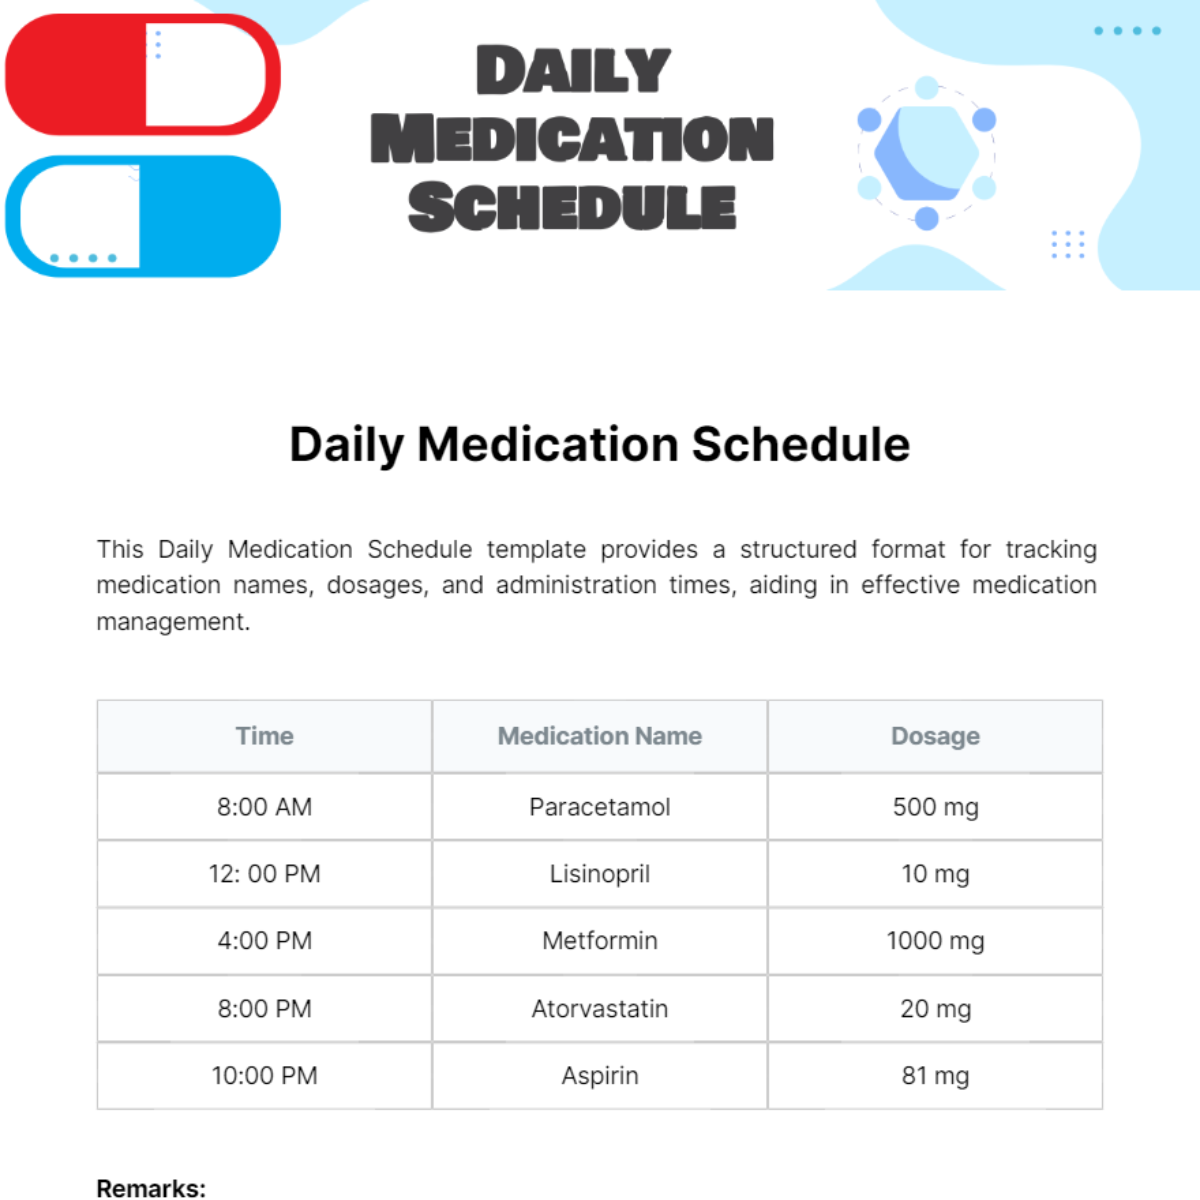 Daily Medication Schedule Template